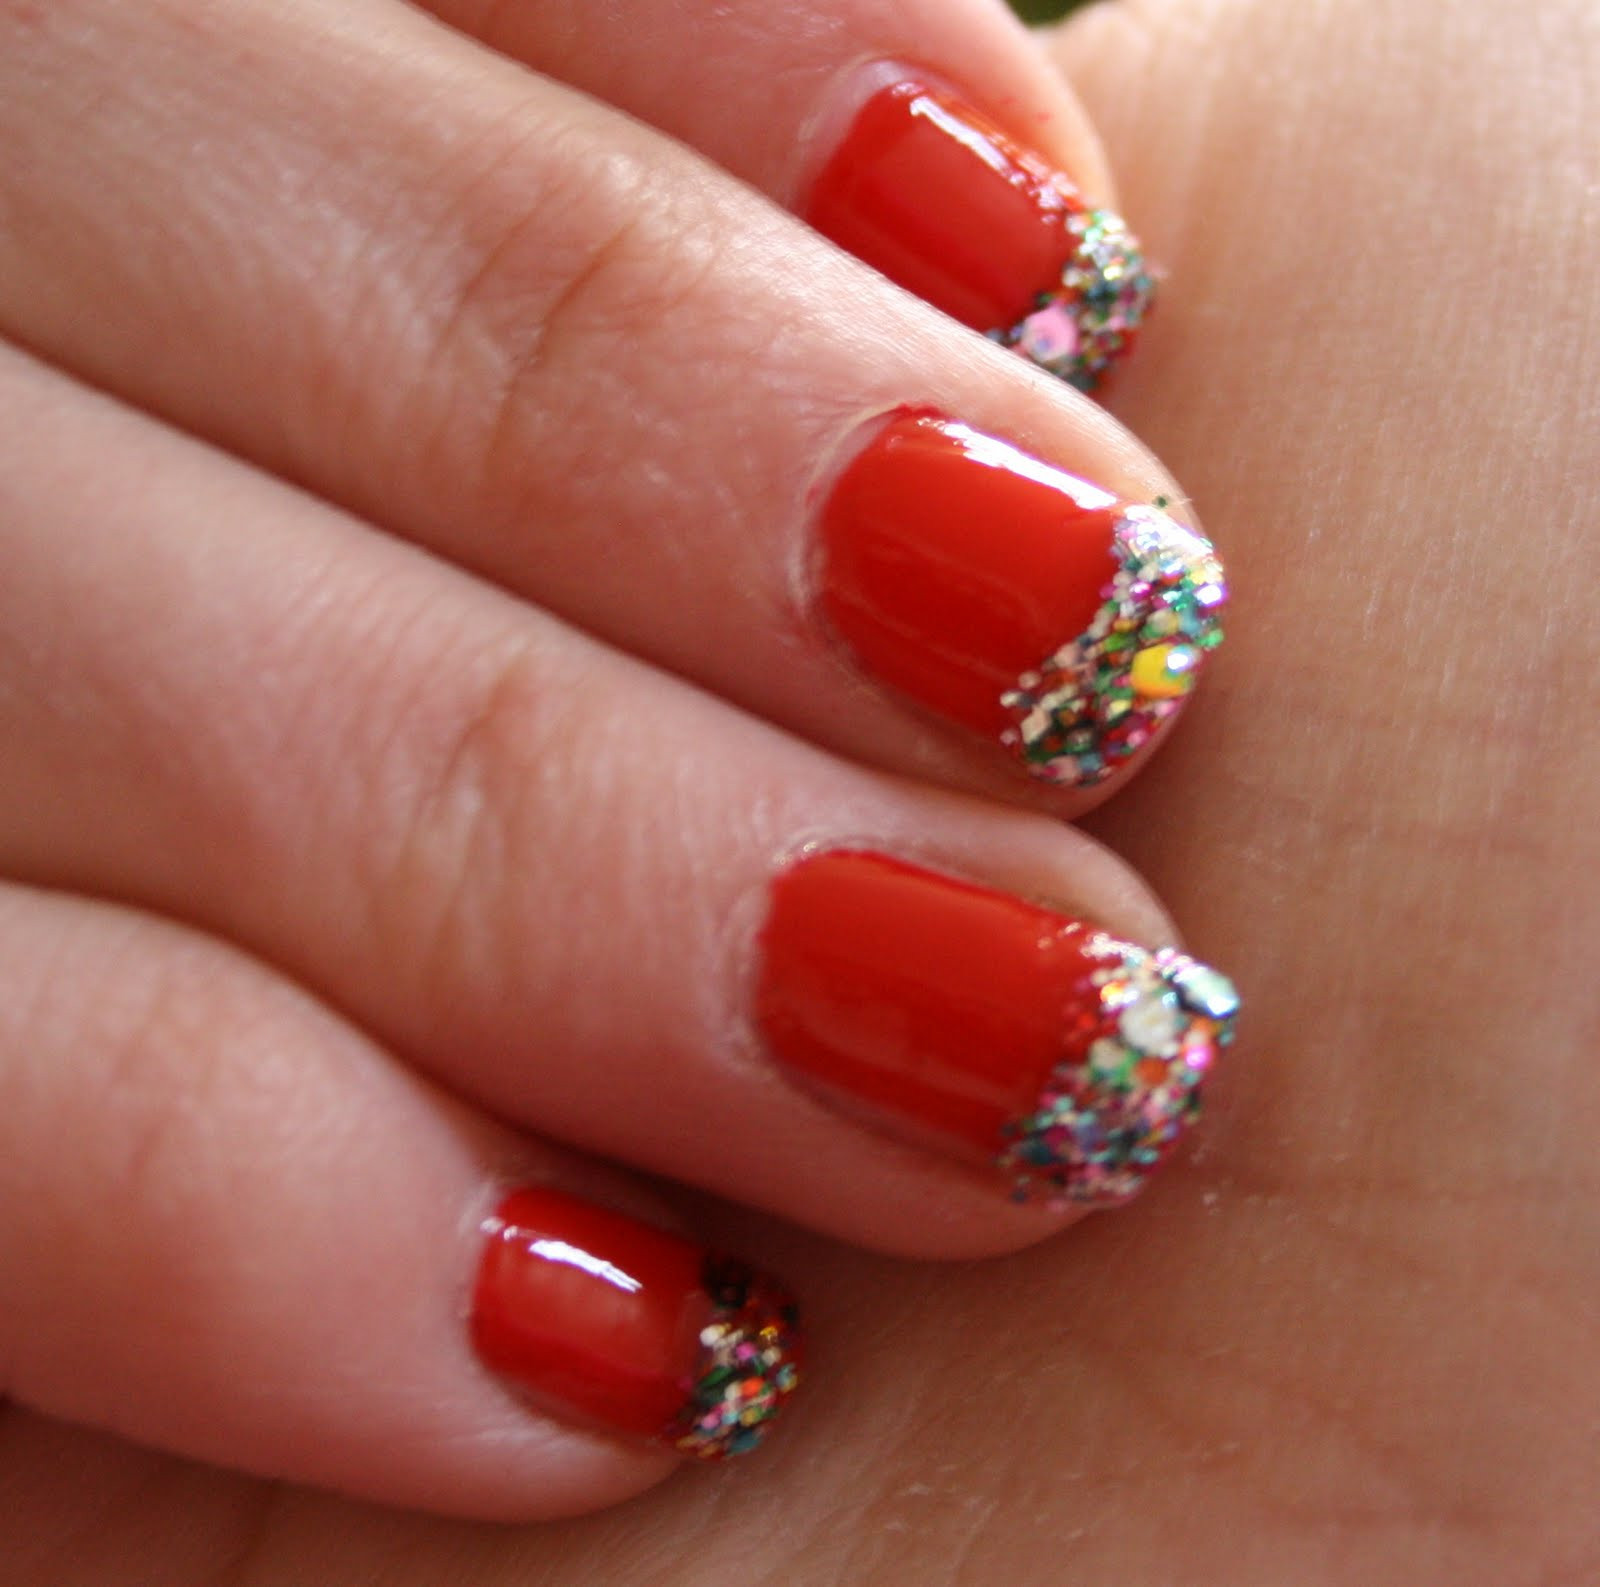 Red Glitter Tips Nails
 RED NAILS WITH GLITTER TIPS – Glam Radar